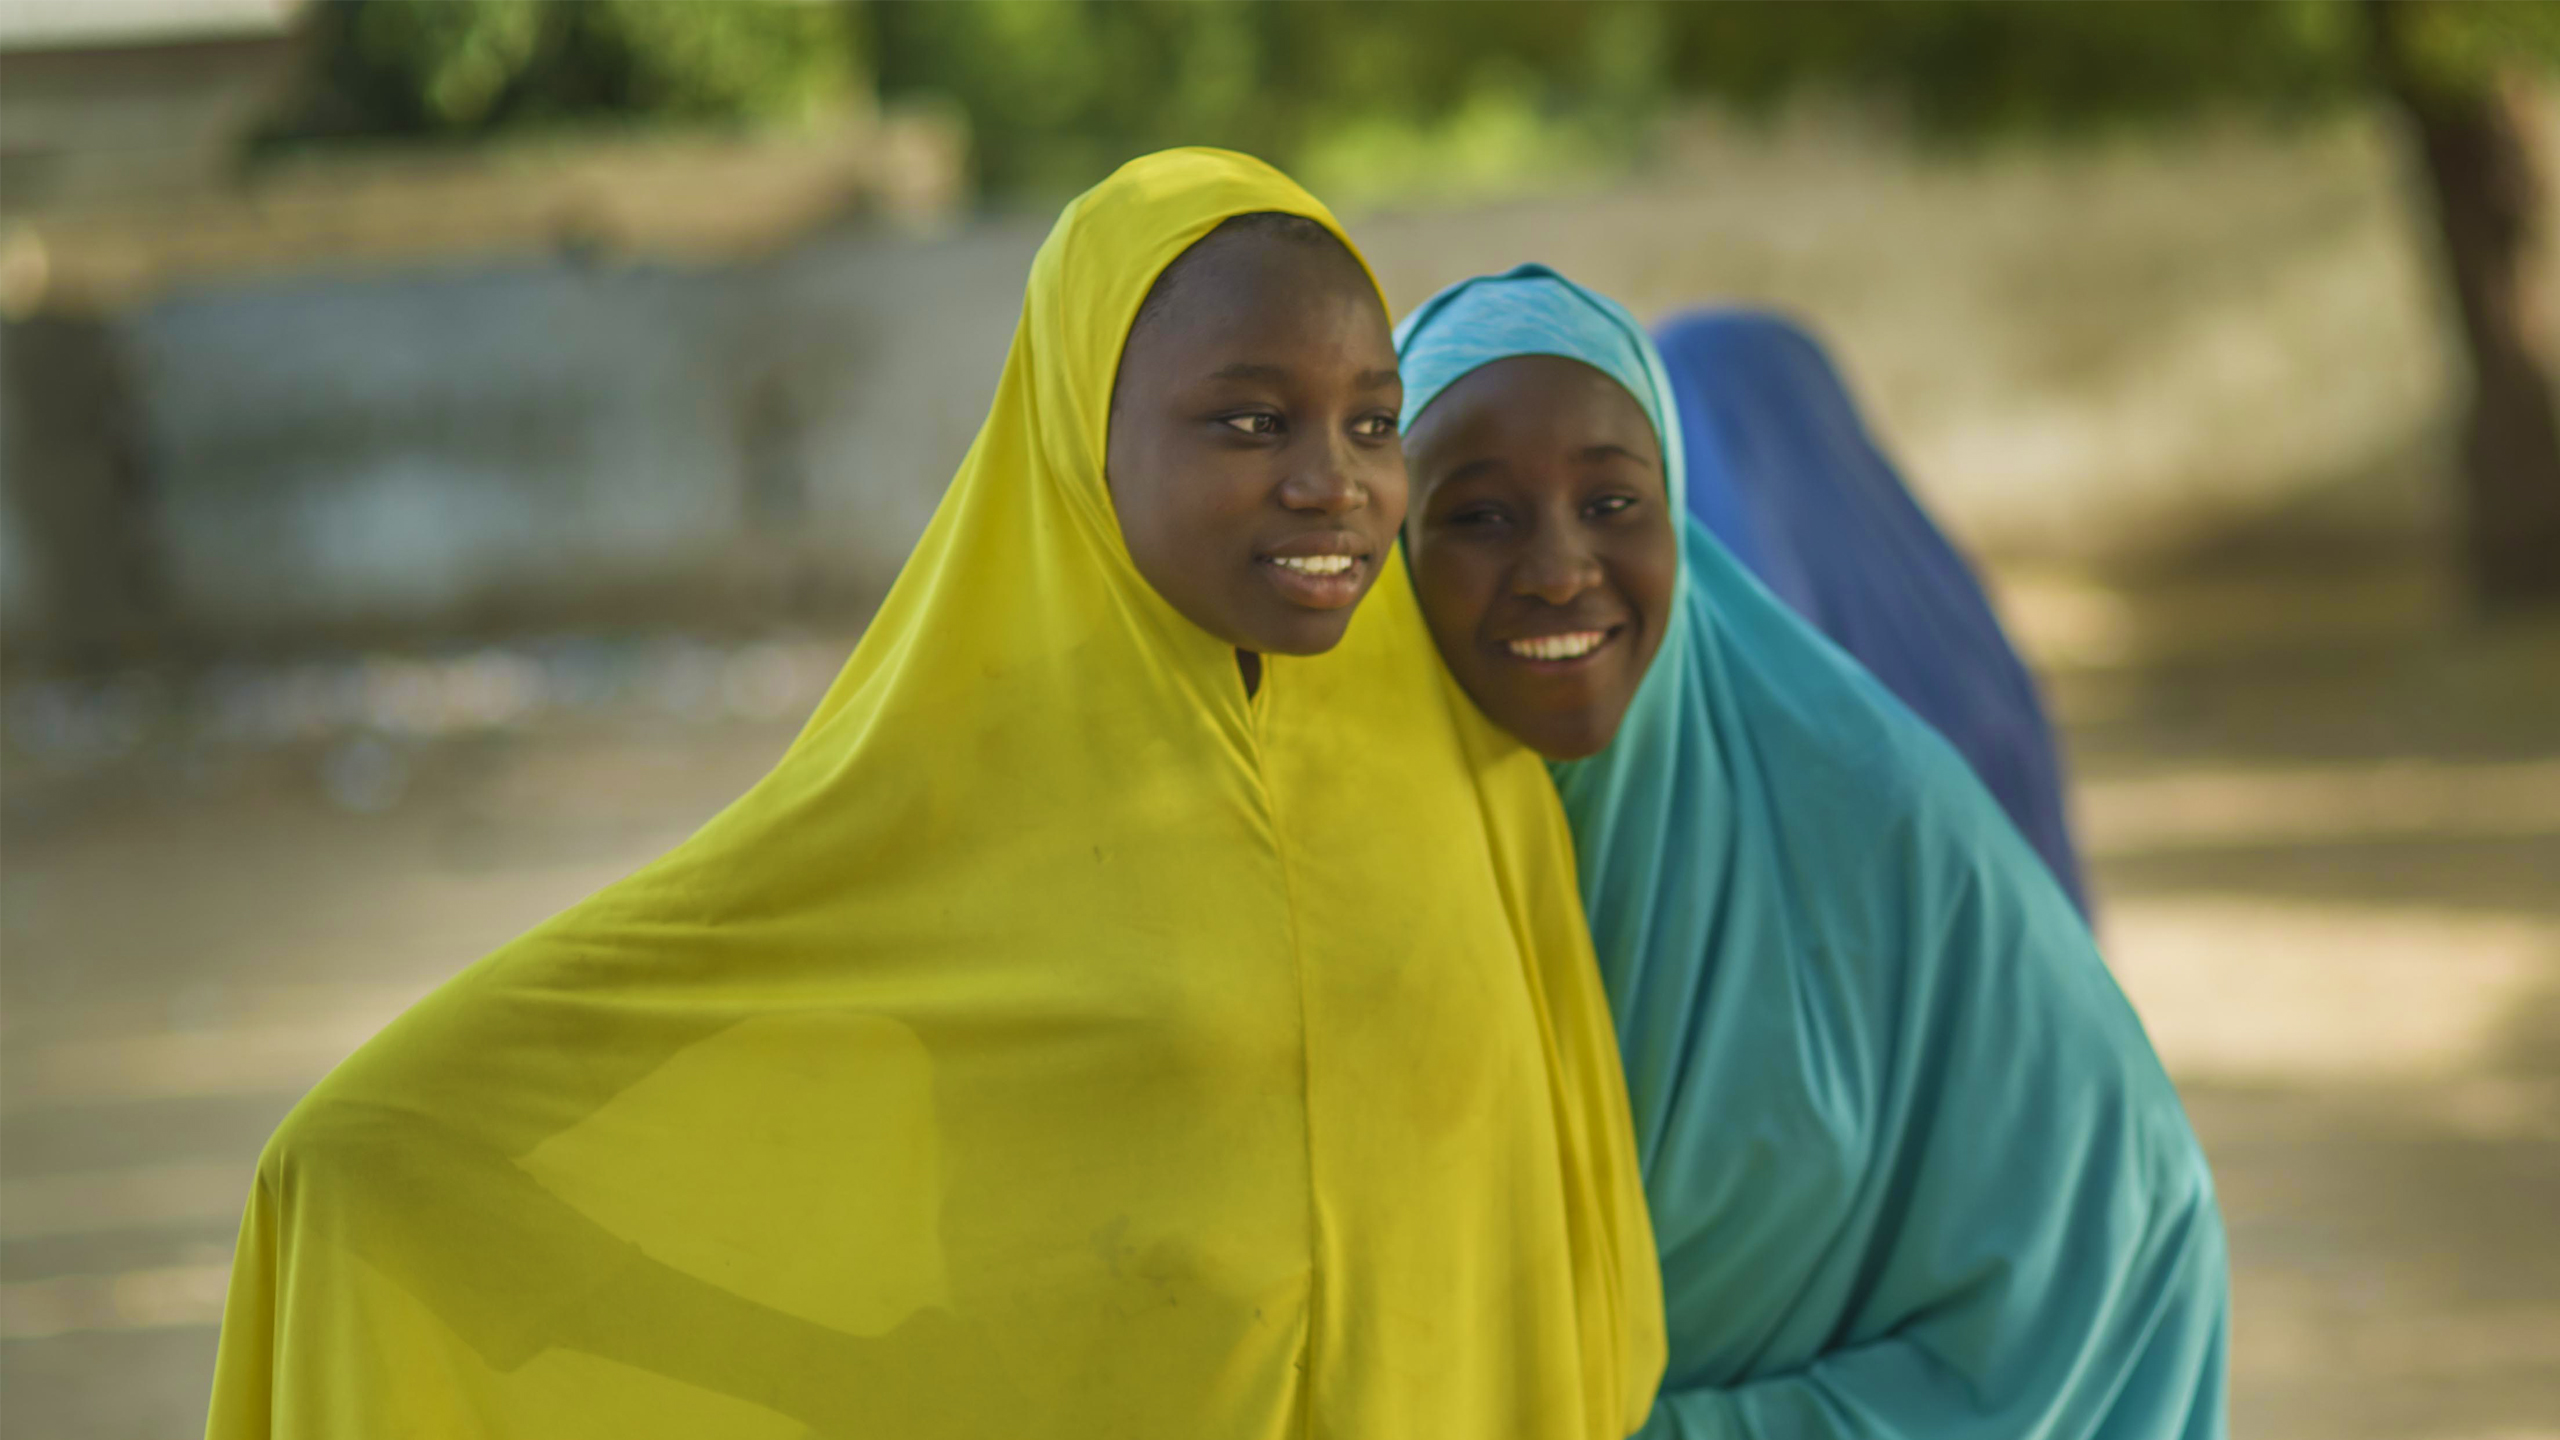 MAG - Freeing people from fear. Two young girls wearing brightly coloured covering smiling for the camera.